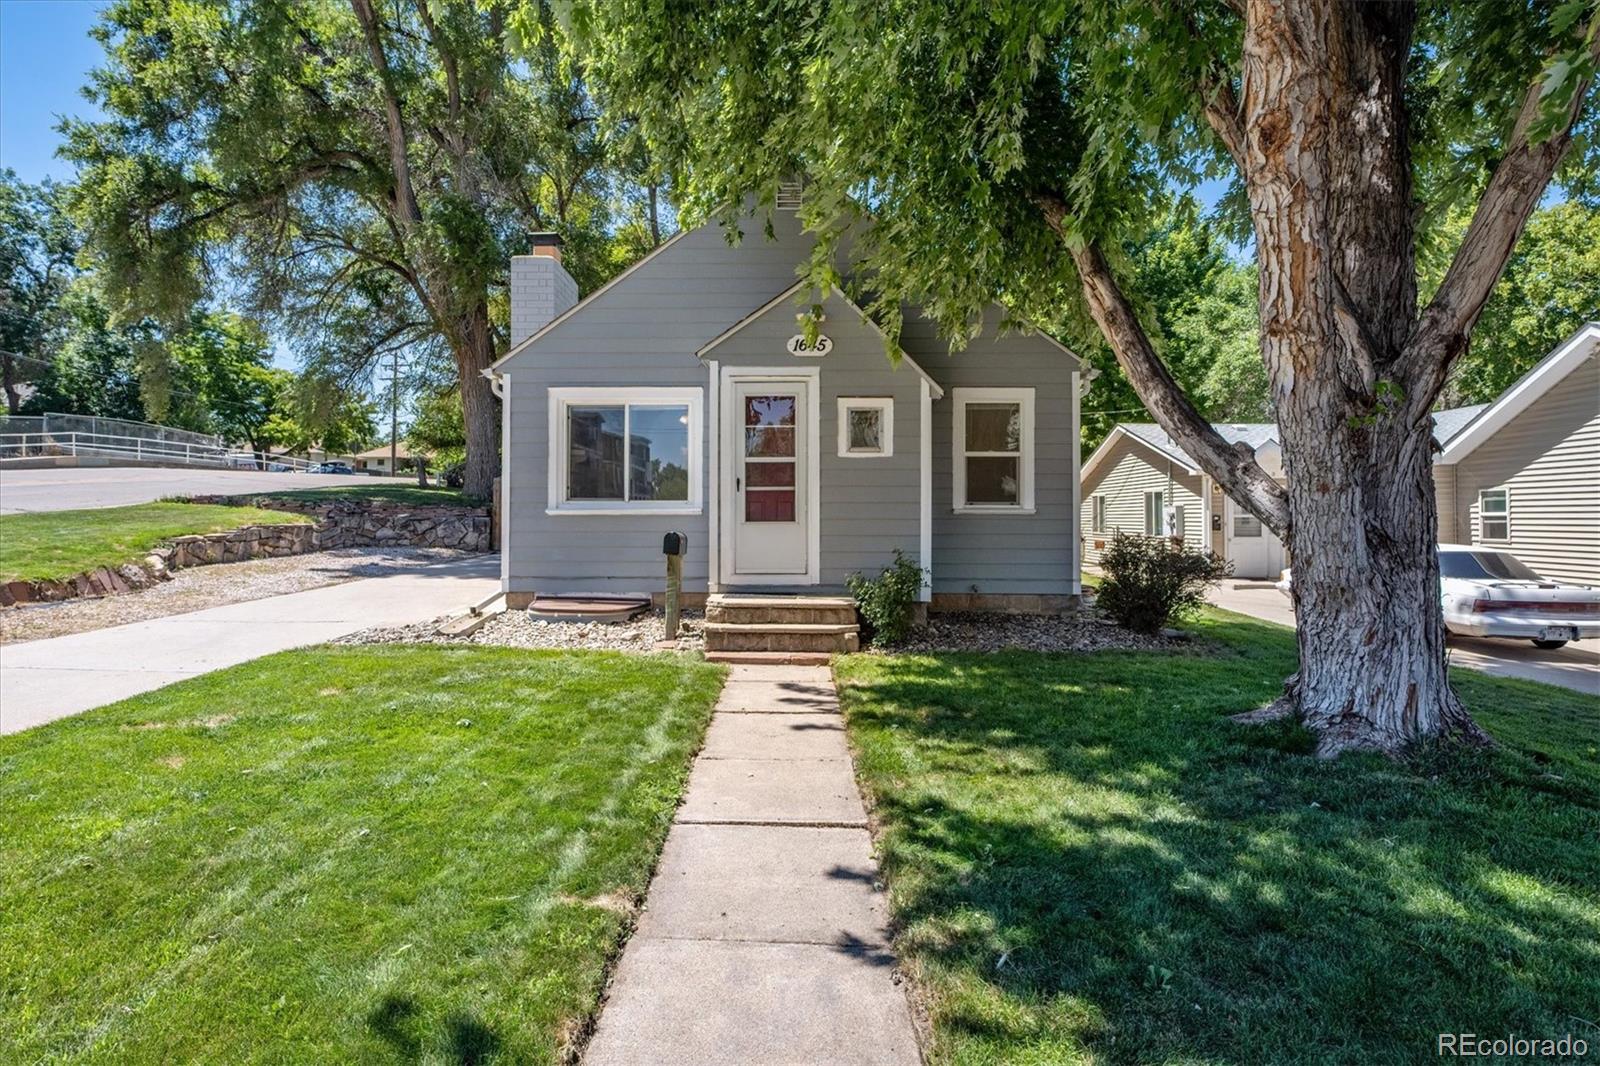 1645  6th Avenue, greeley MLS: 5437117 Beds: 4 Baths: 2 Price: $353,000